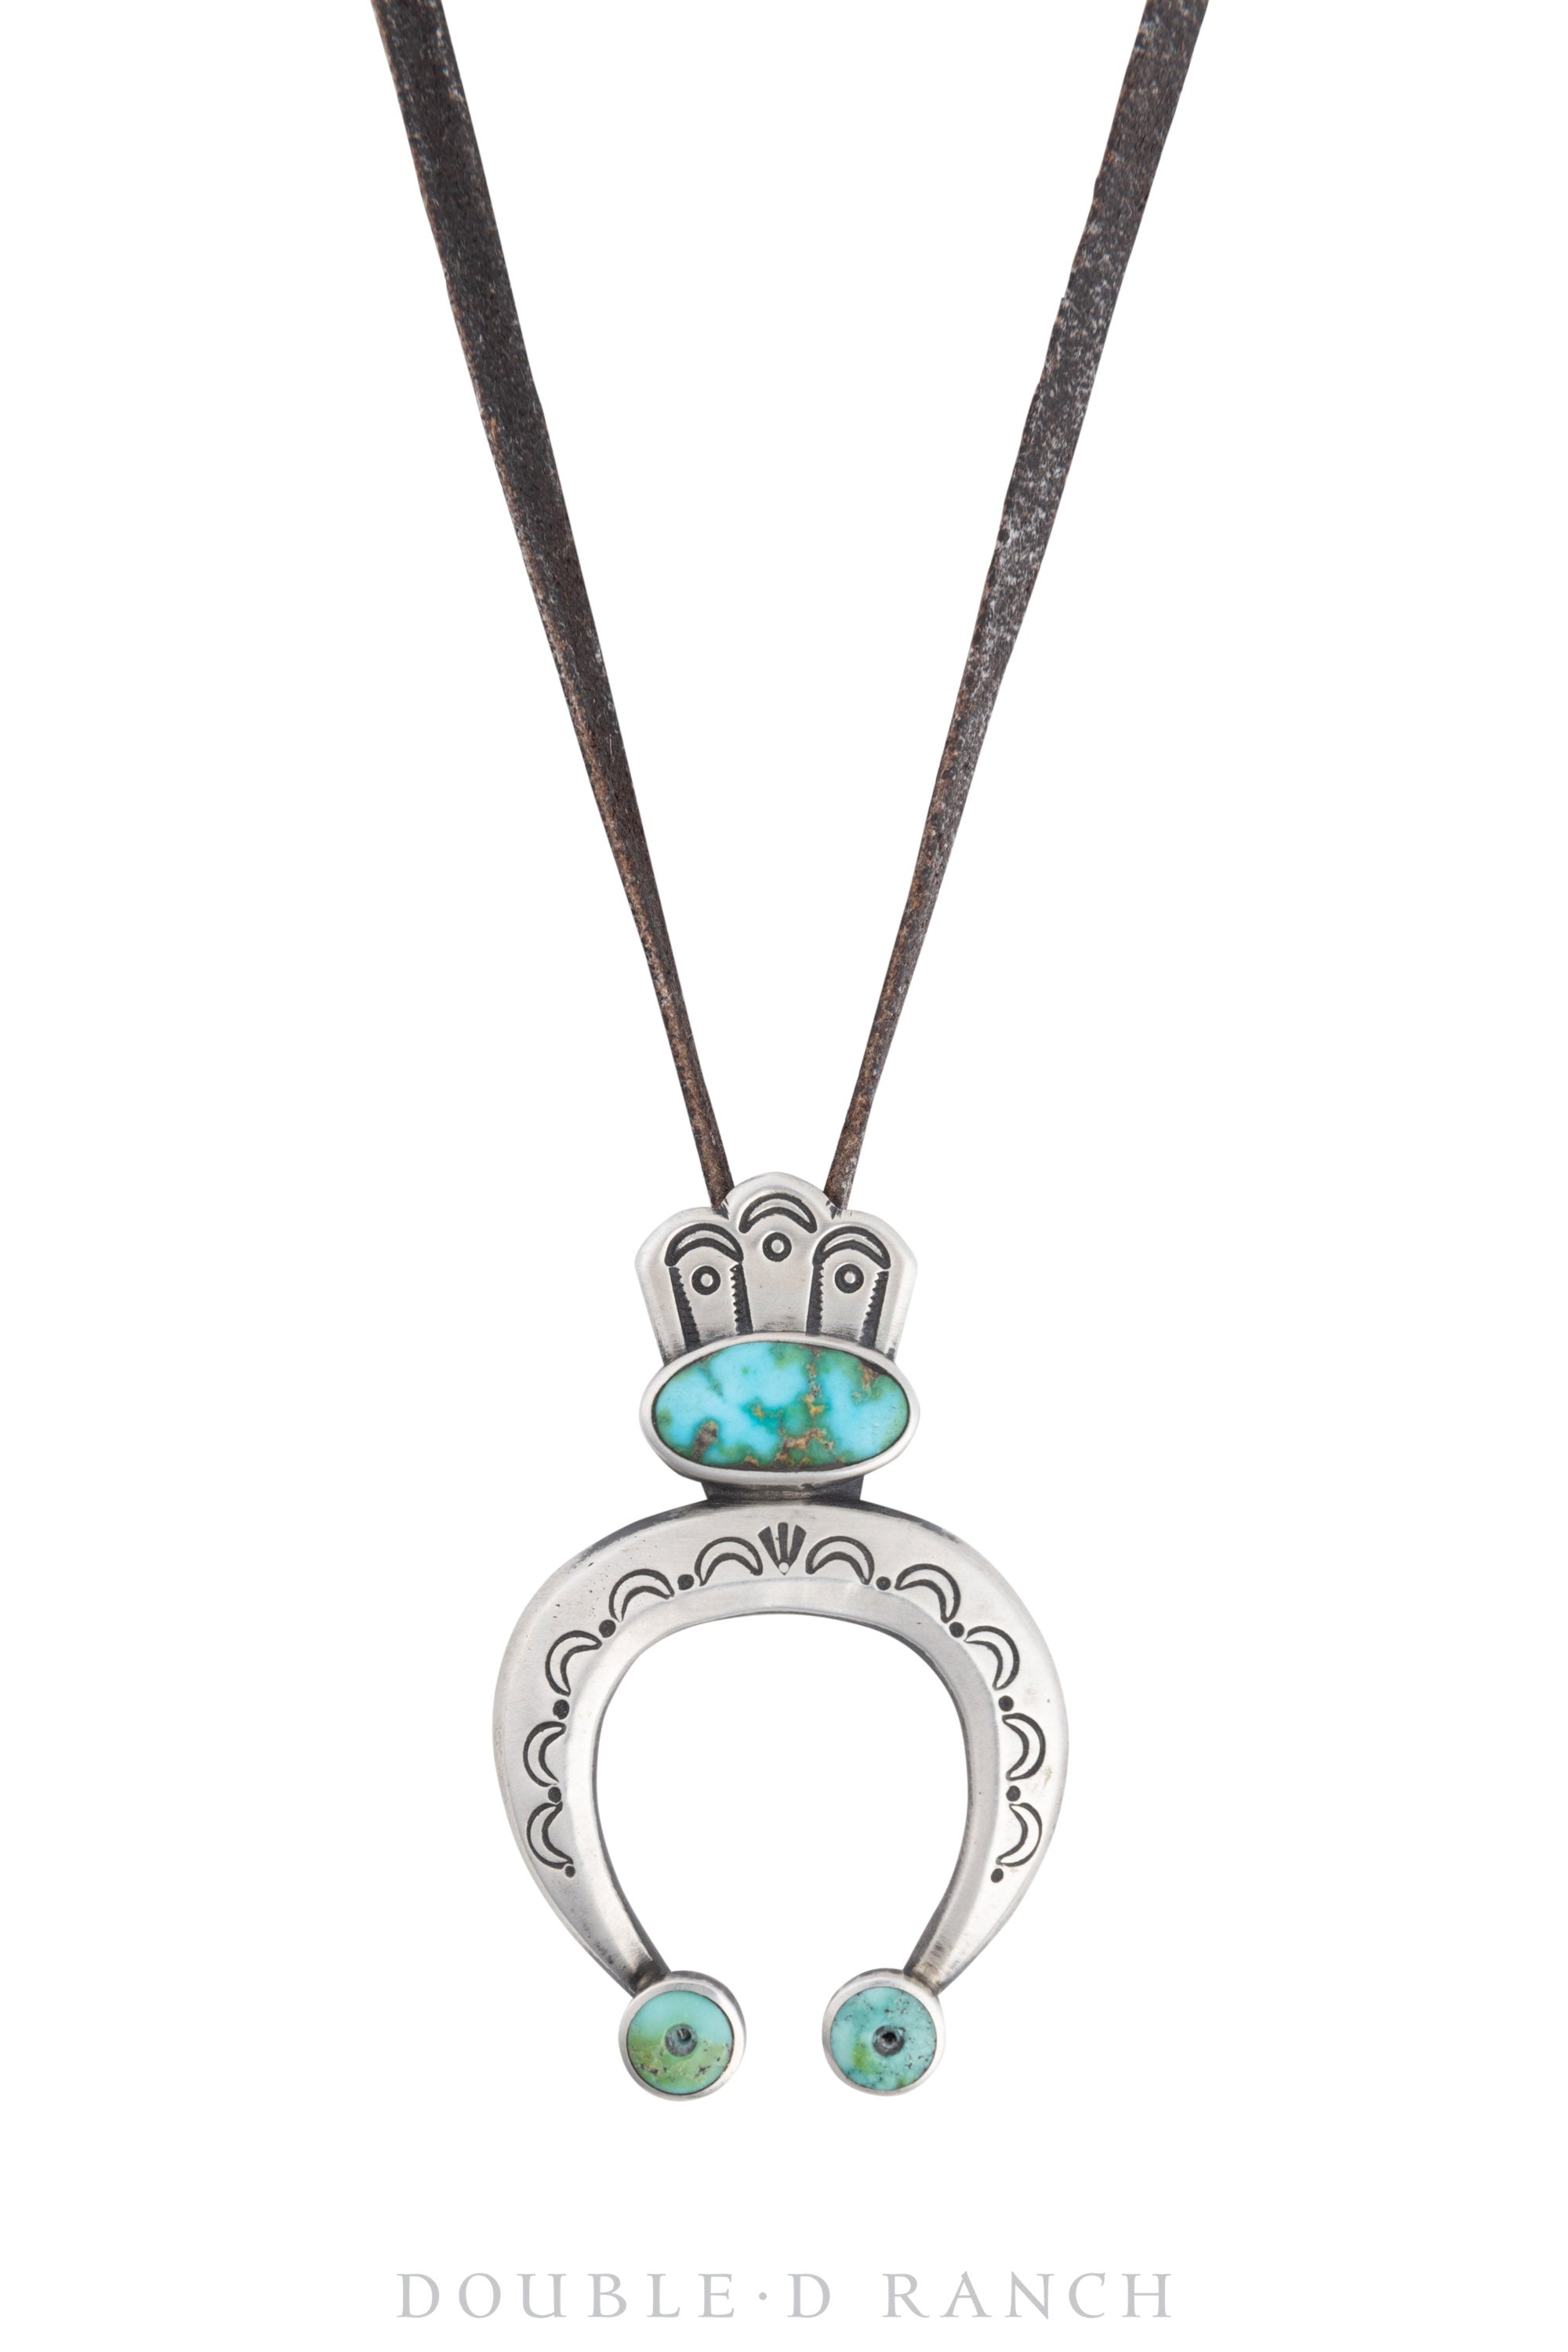 Necklace, Leather Thong, Turquoise, Sonoran Mountain, Hallmark, Contemporary, 3142